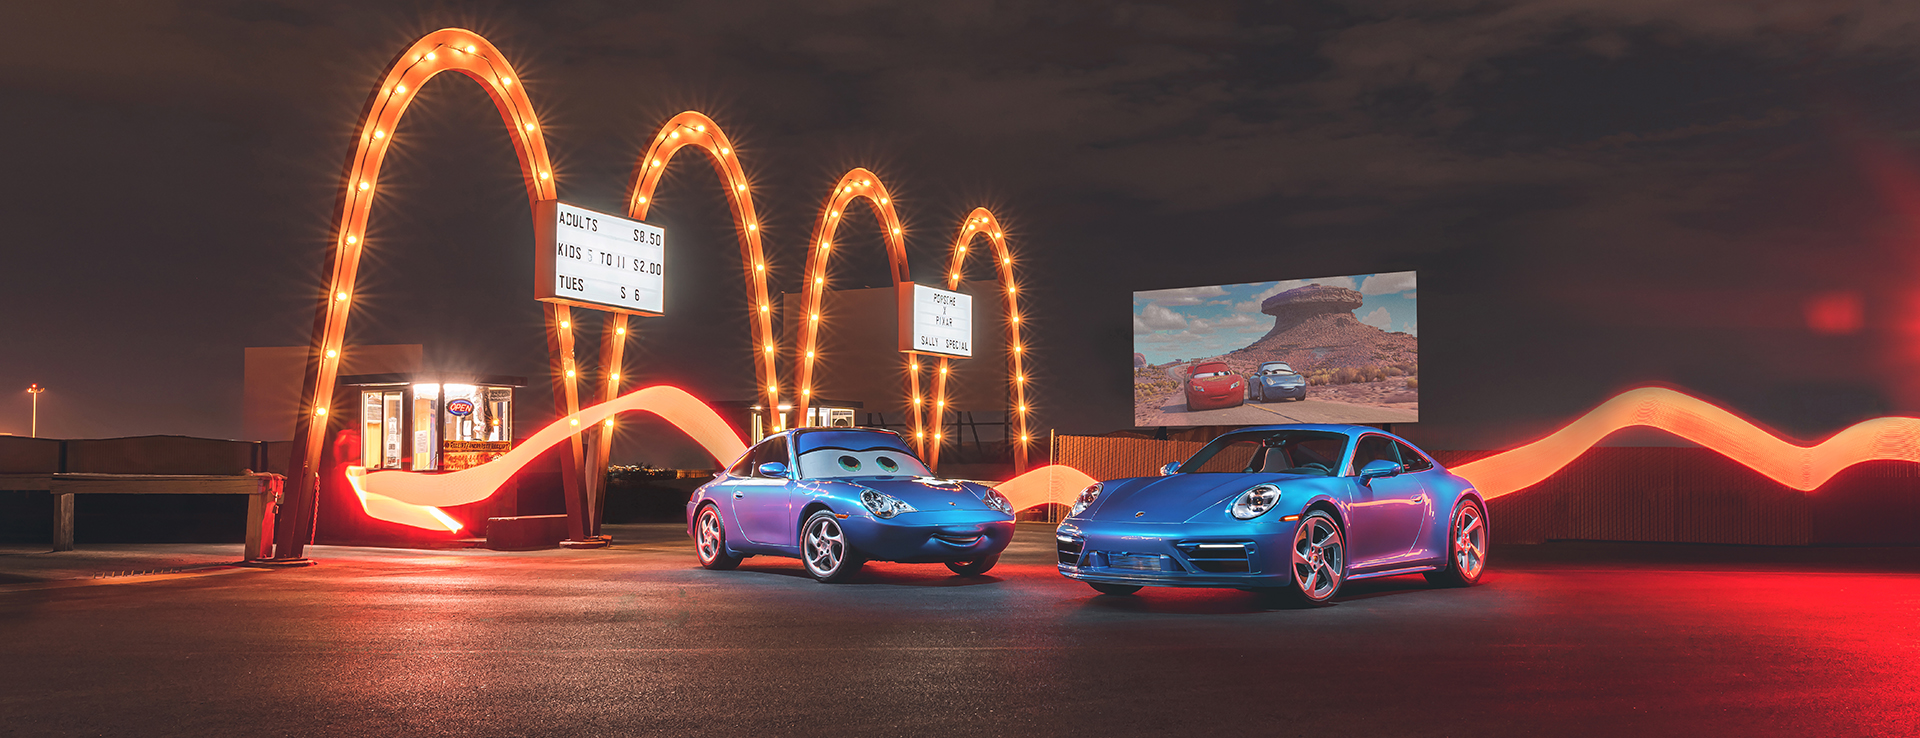 Porsche 911 Sally Special and Cars’ Sally Carrera at night